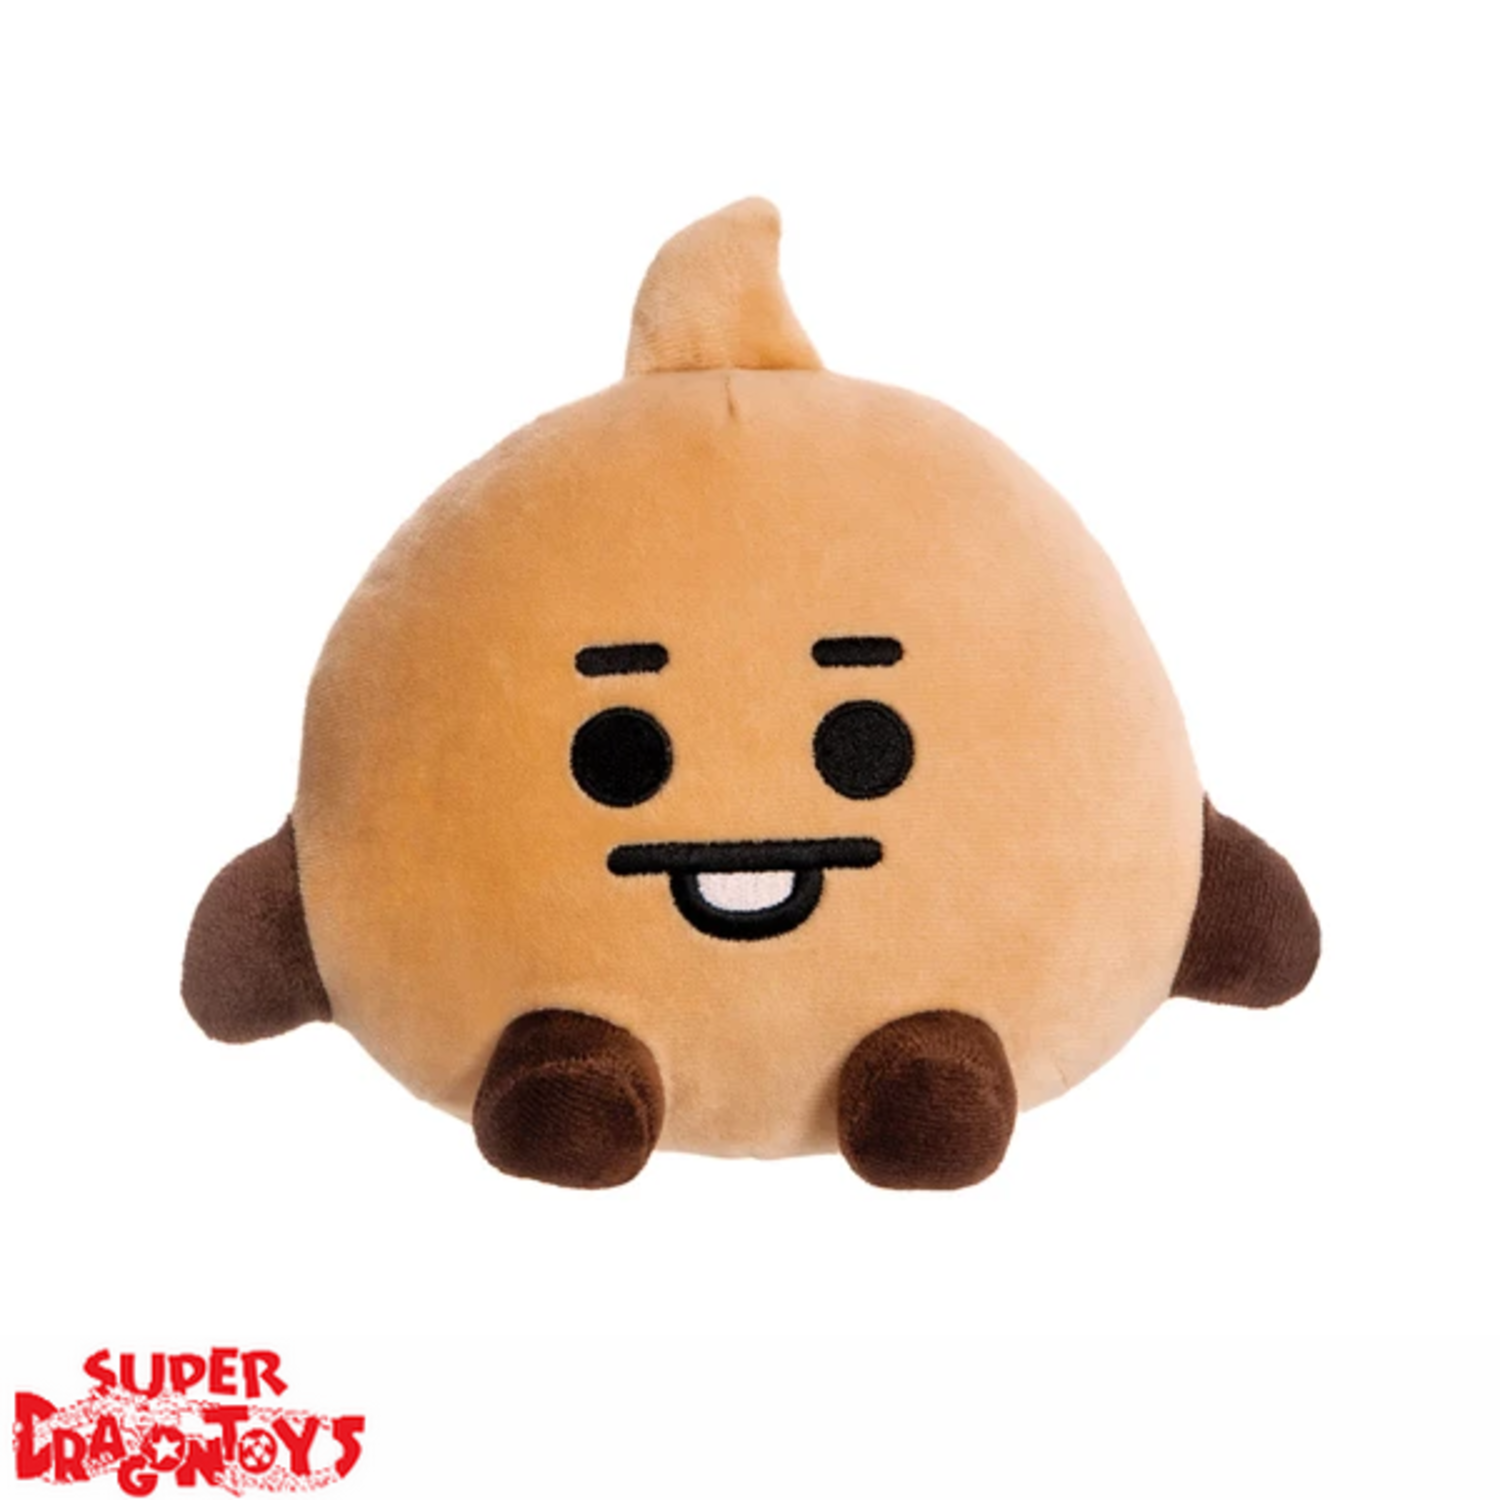 BTS - BABY [SHOOKY] PLUSH DOLL (20CM) - BT21 COLLECTION